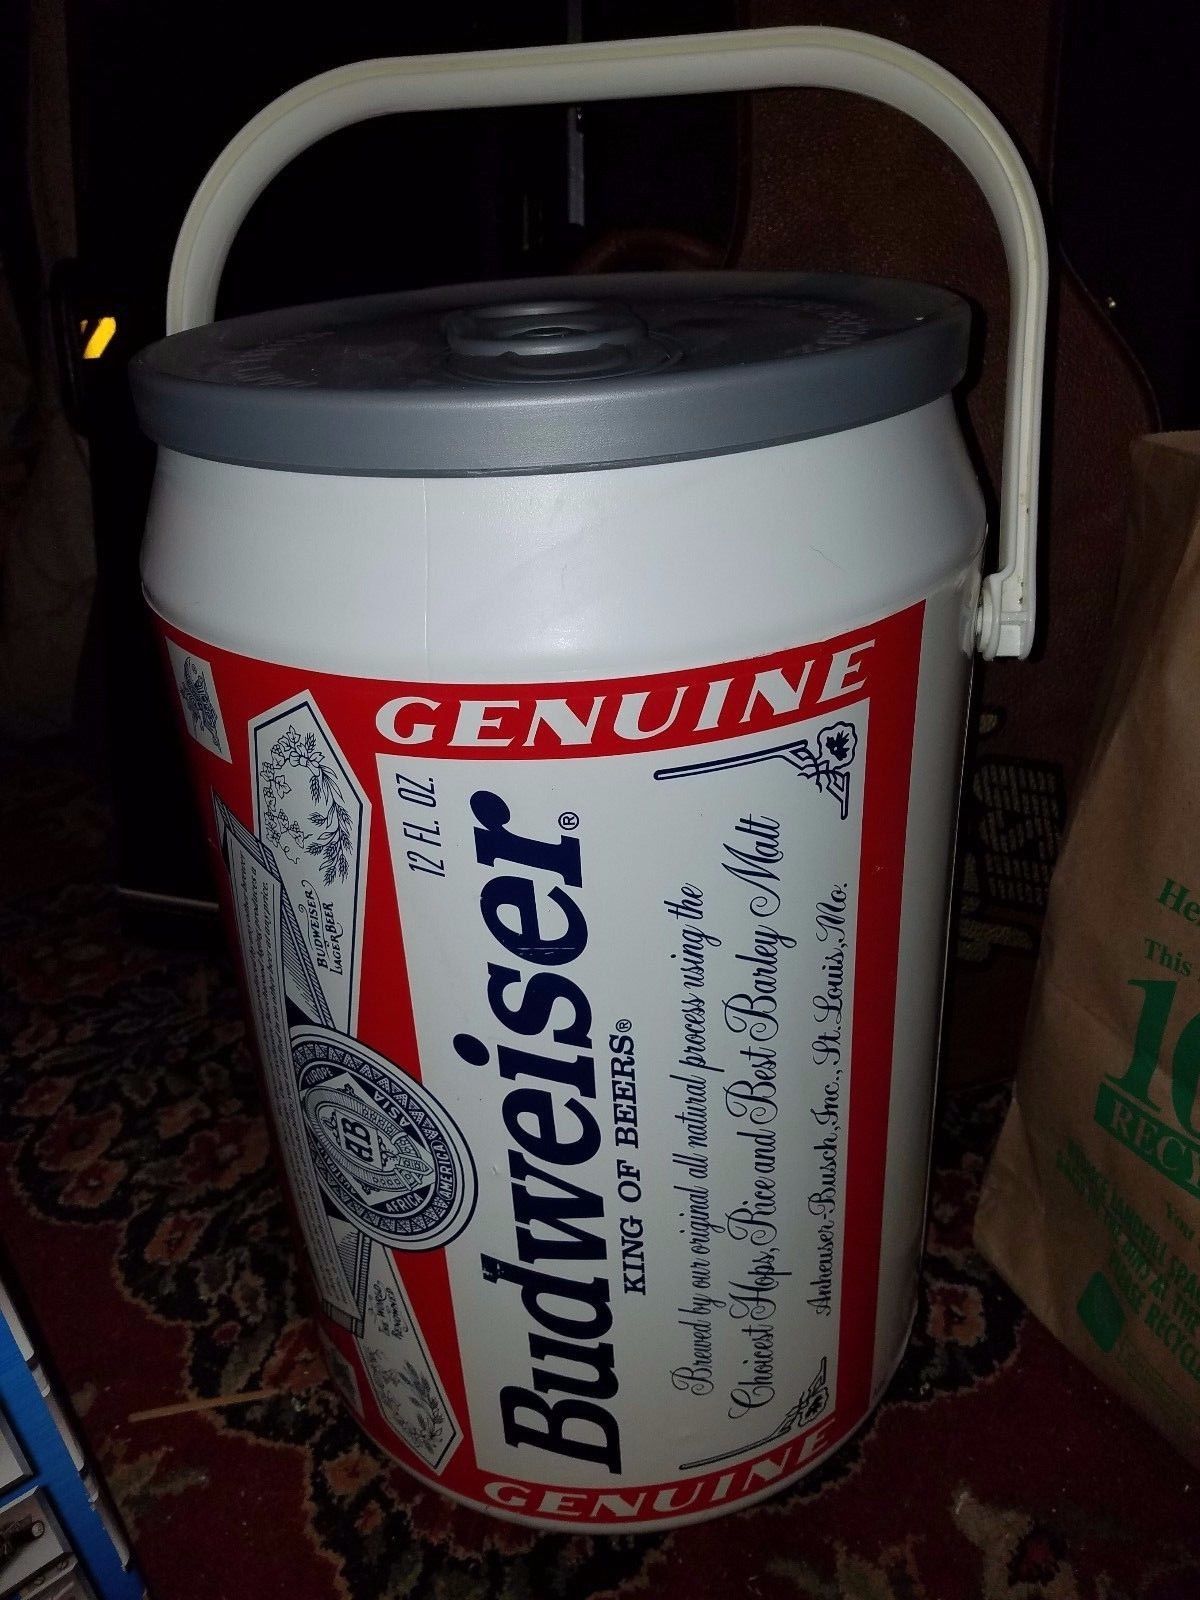 beer can shaped cooler